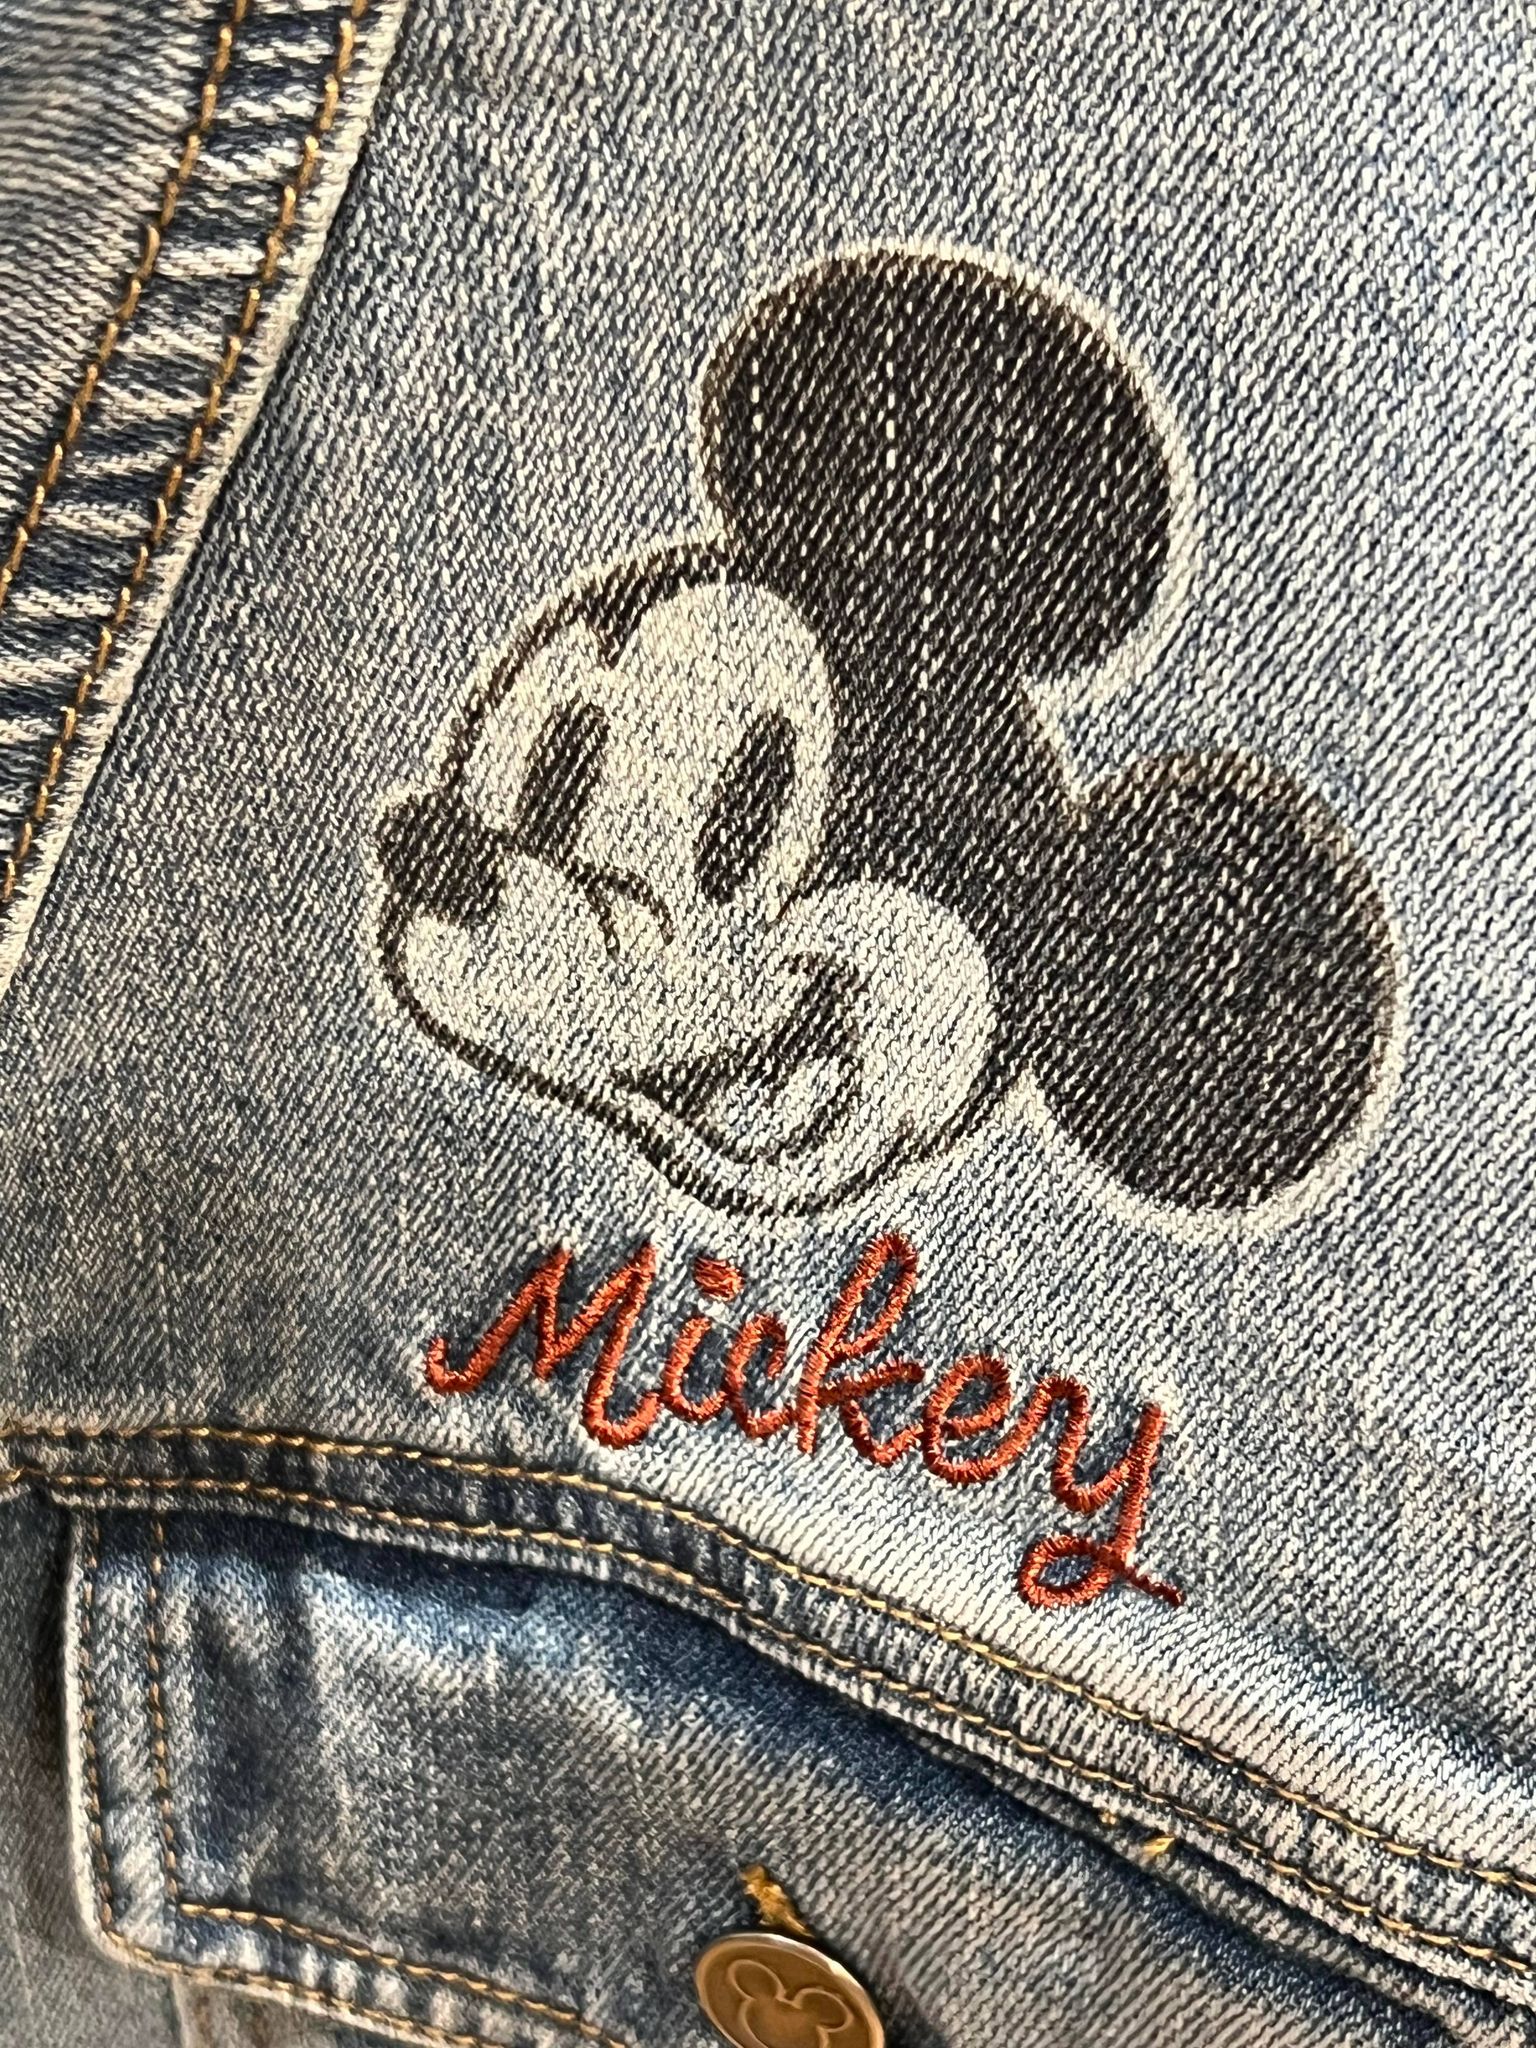 A Stylish New Jean Jacket Has Arrived at Walt Disney World, Featuring ...